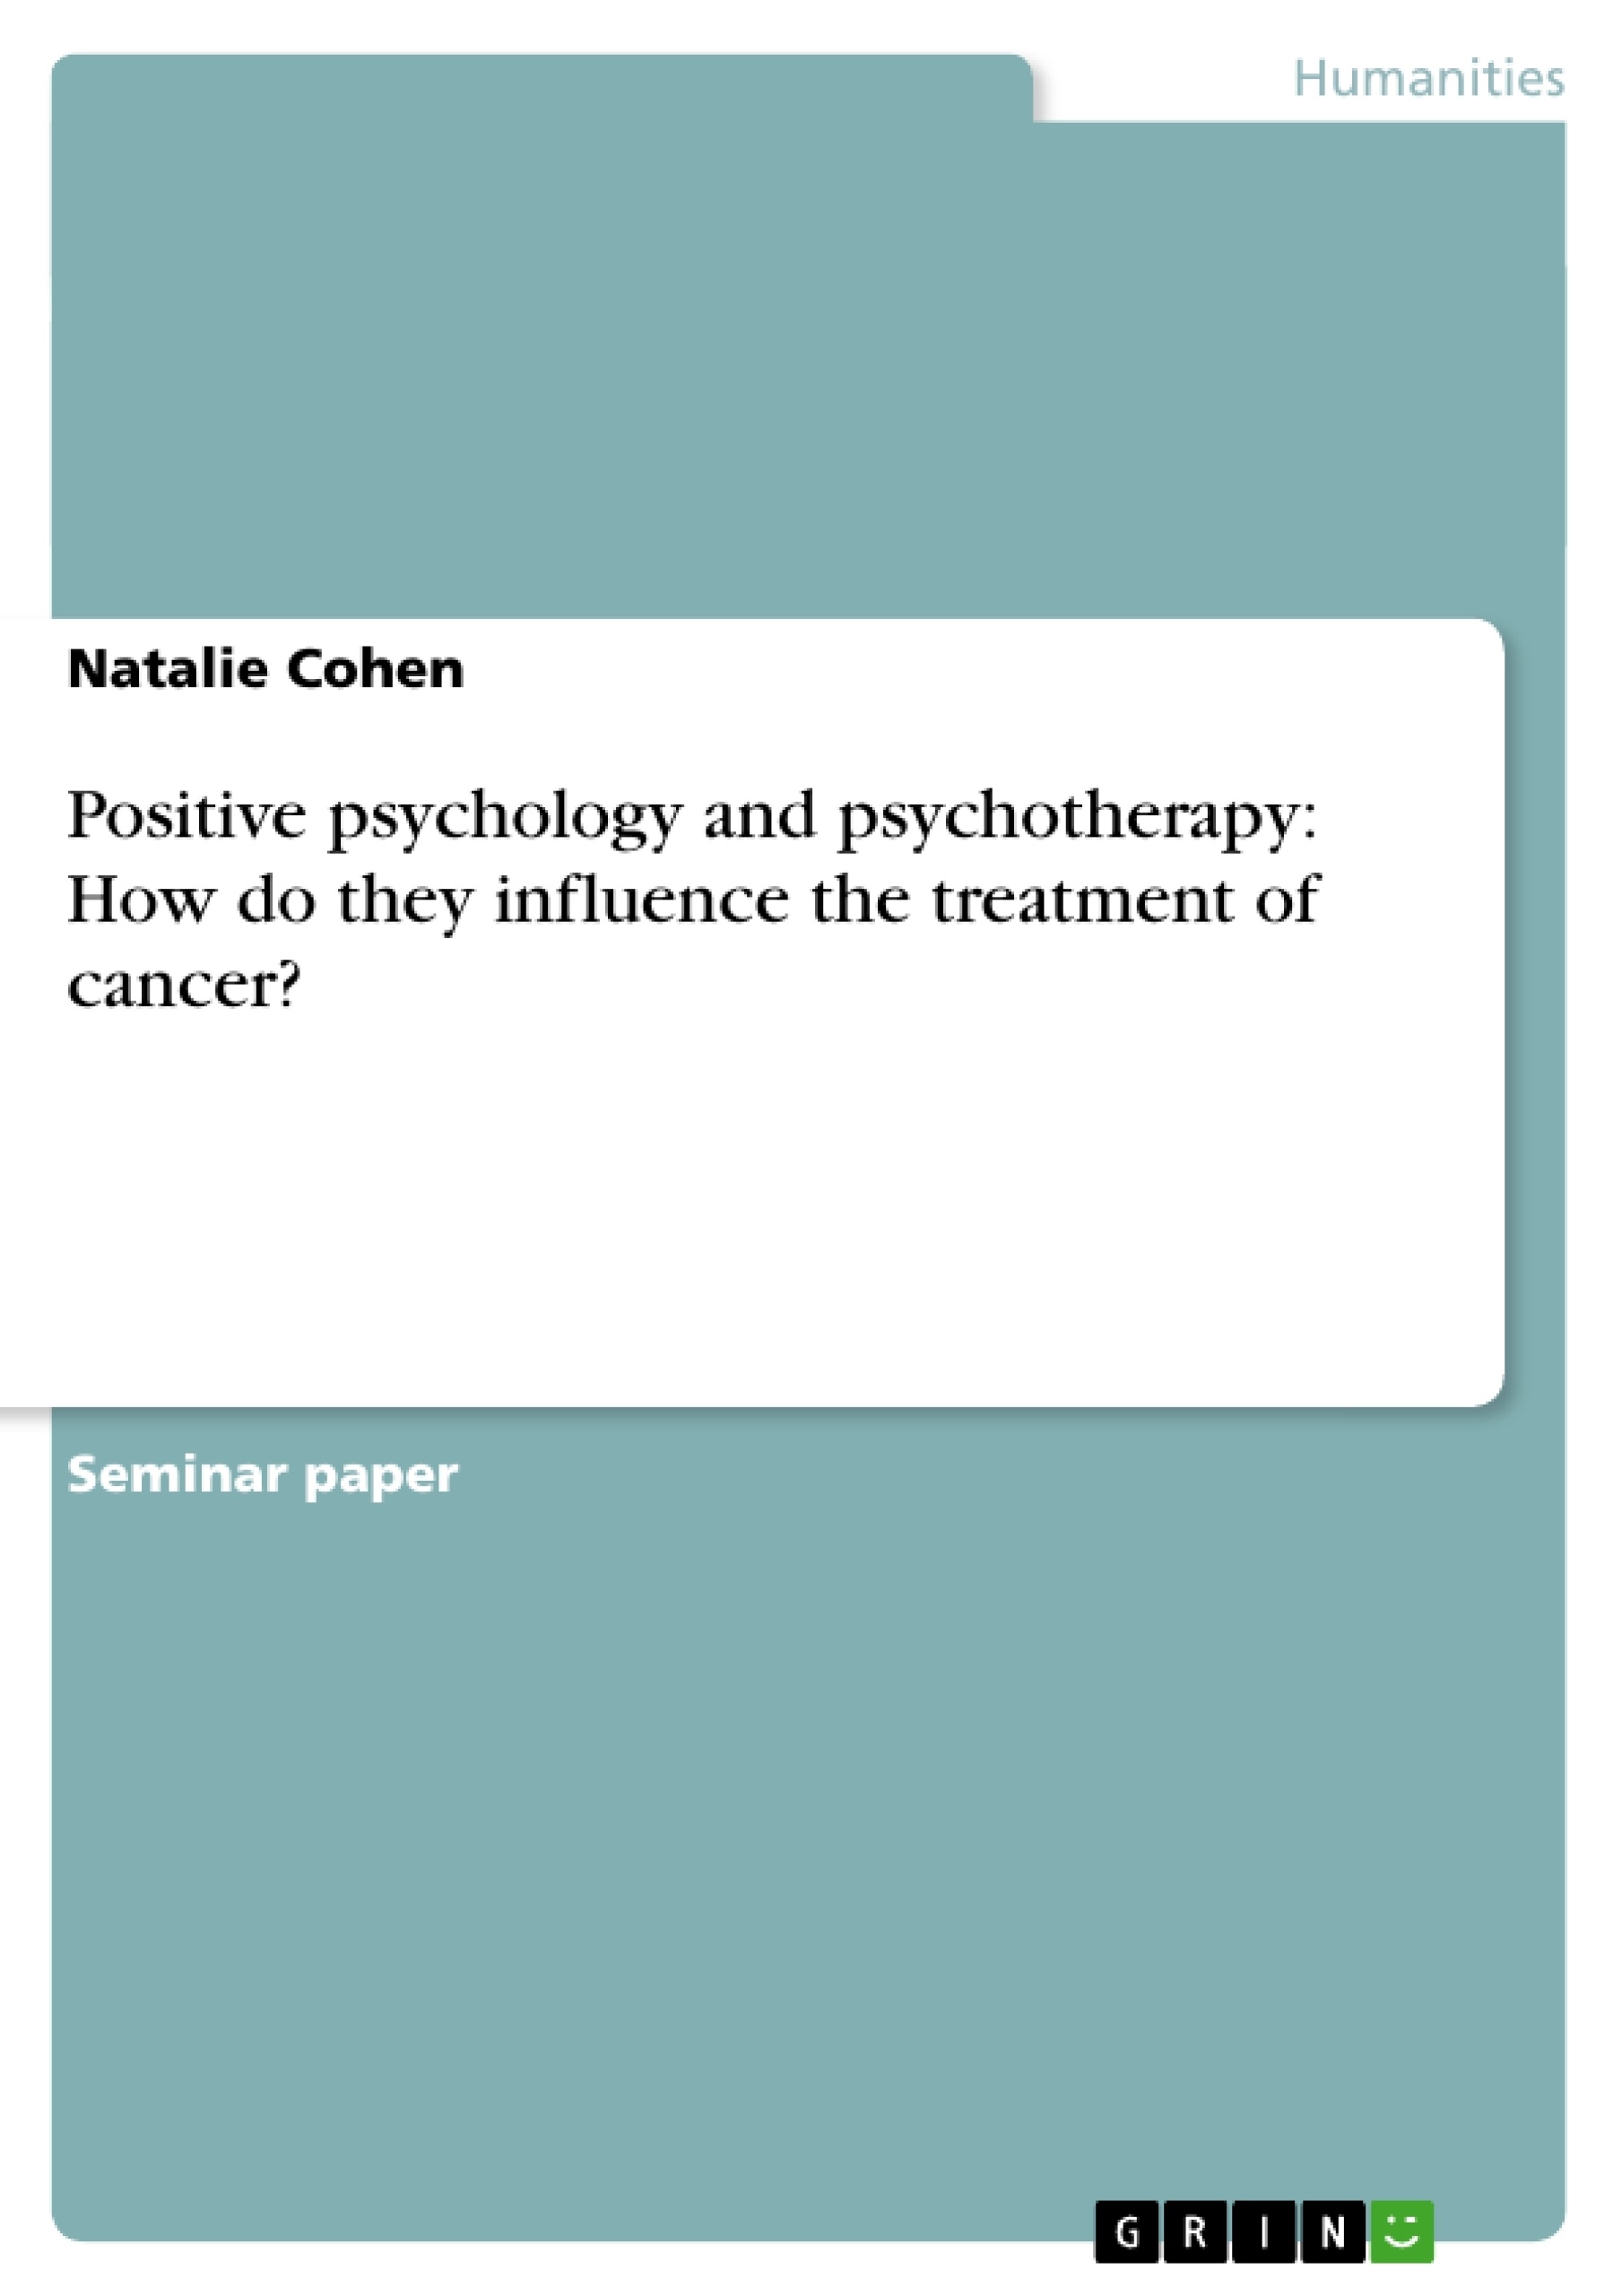 Título: Positive psychology and psychotherapy: How do they influence the treatment of cancer?